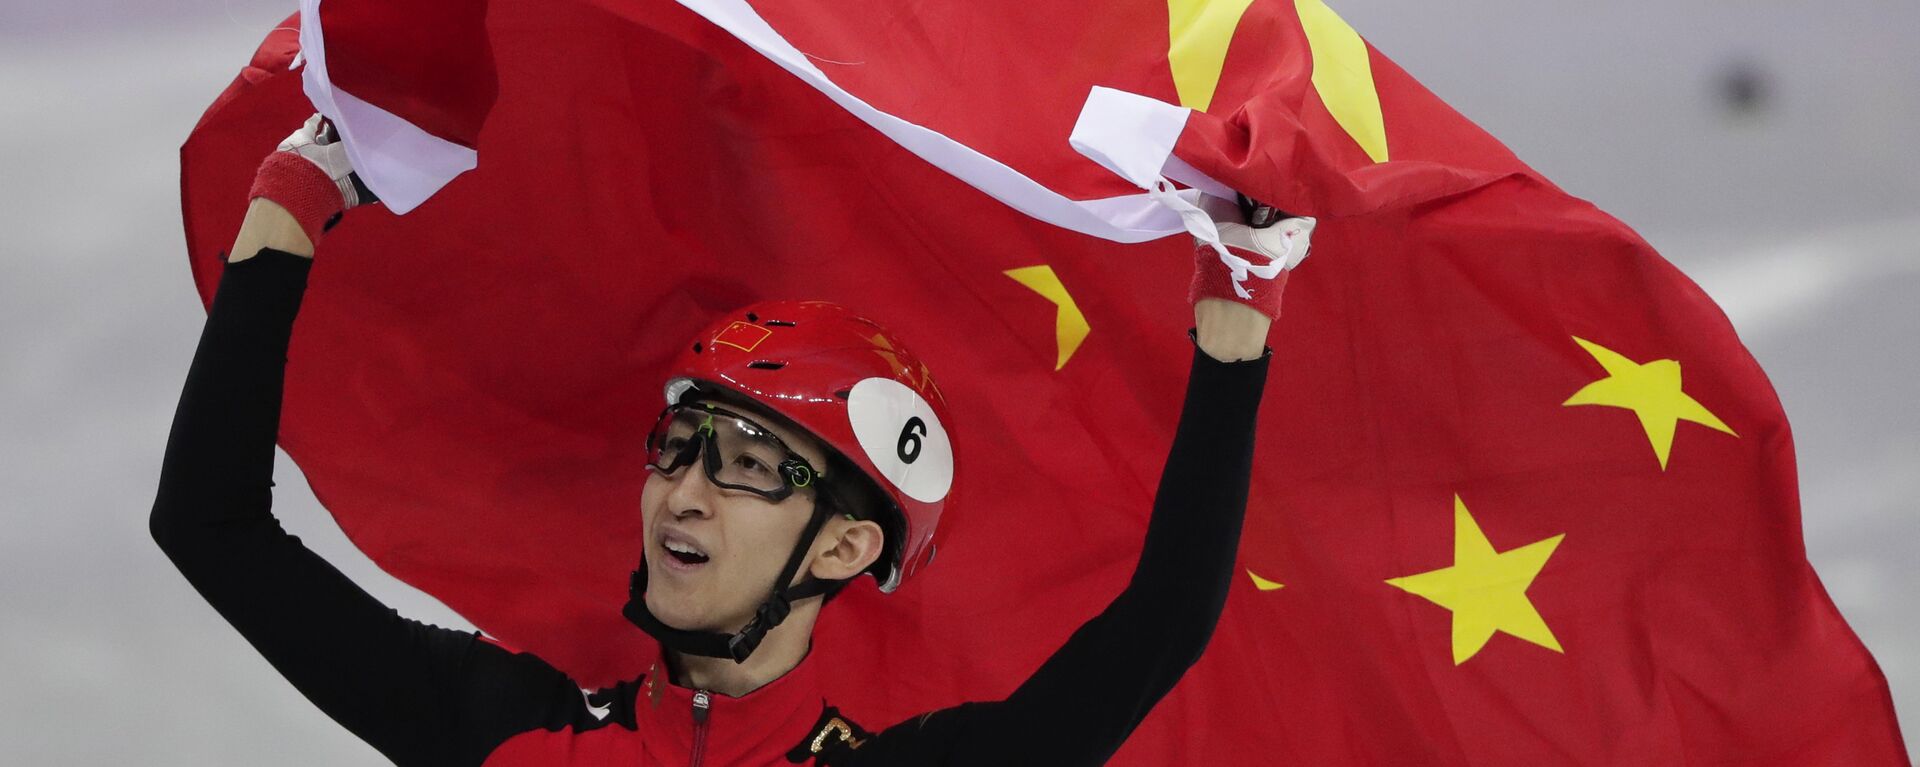 Wu Dajing of China celebrates after winning the men's 500 meters short track speedskating A final in the Gangneung Ice Arena - 俄羅斯衛星通訊社, 1920, 22.02.2018